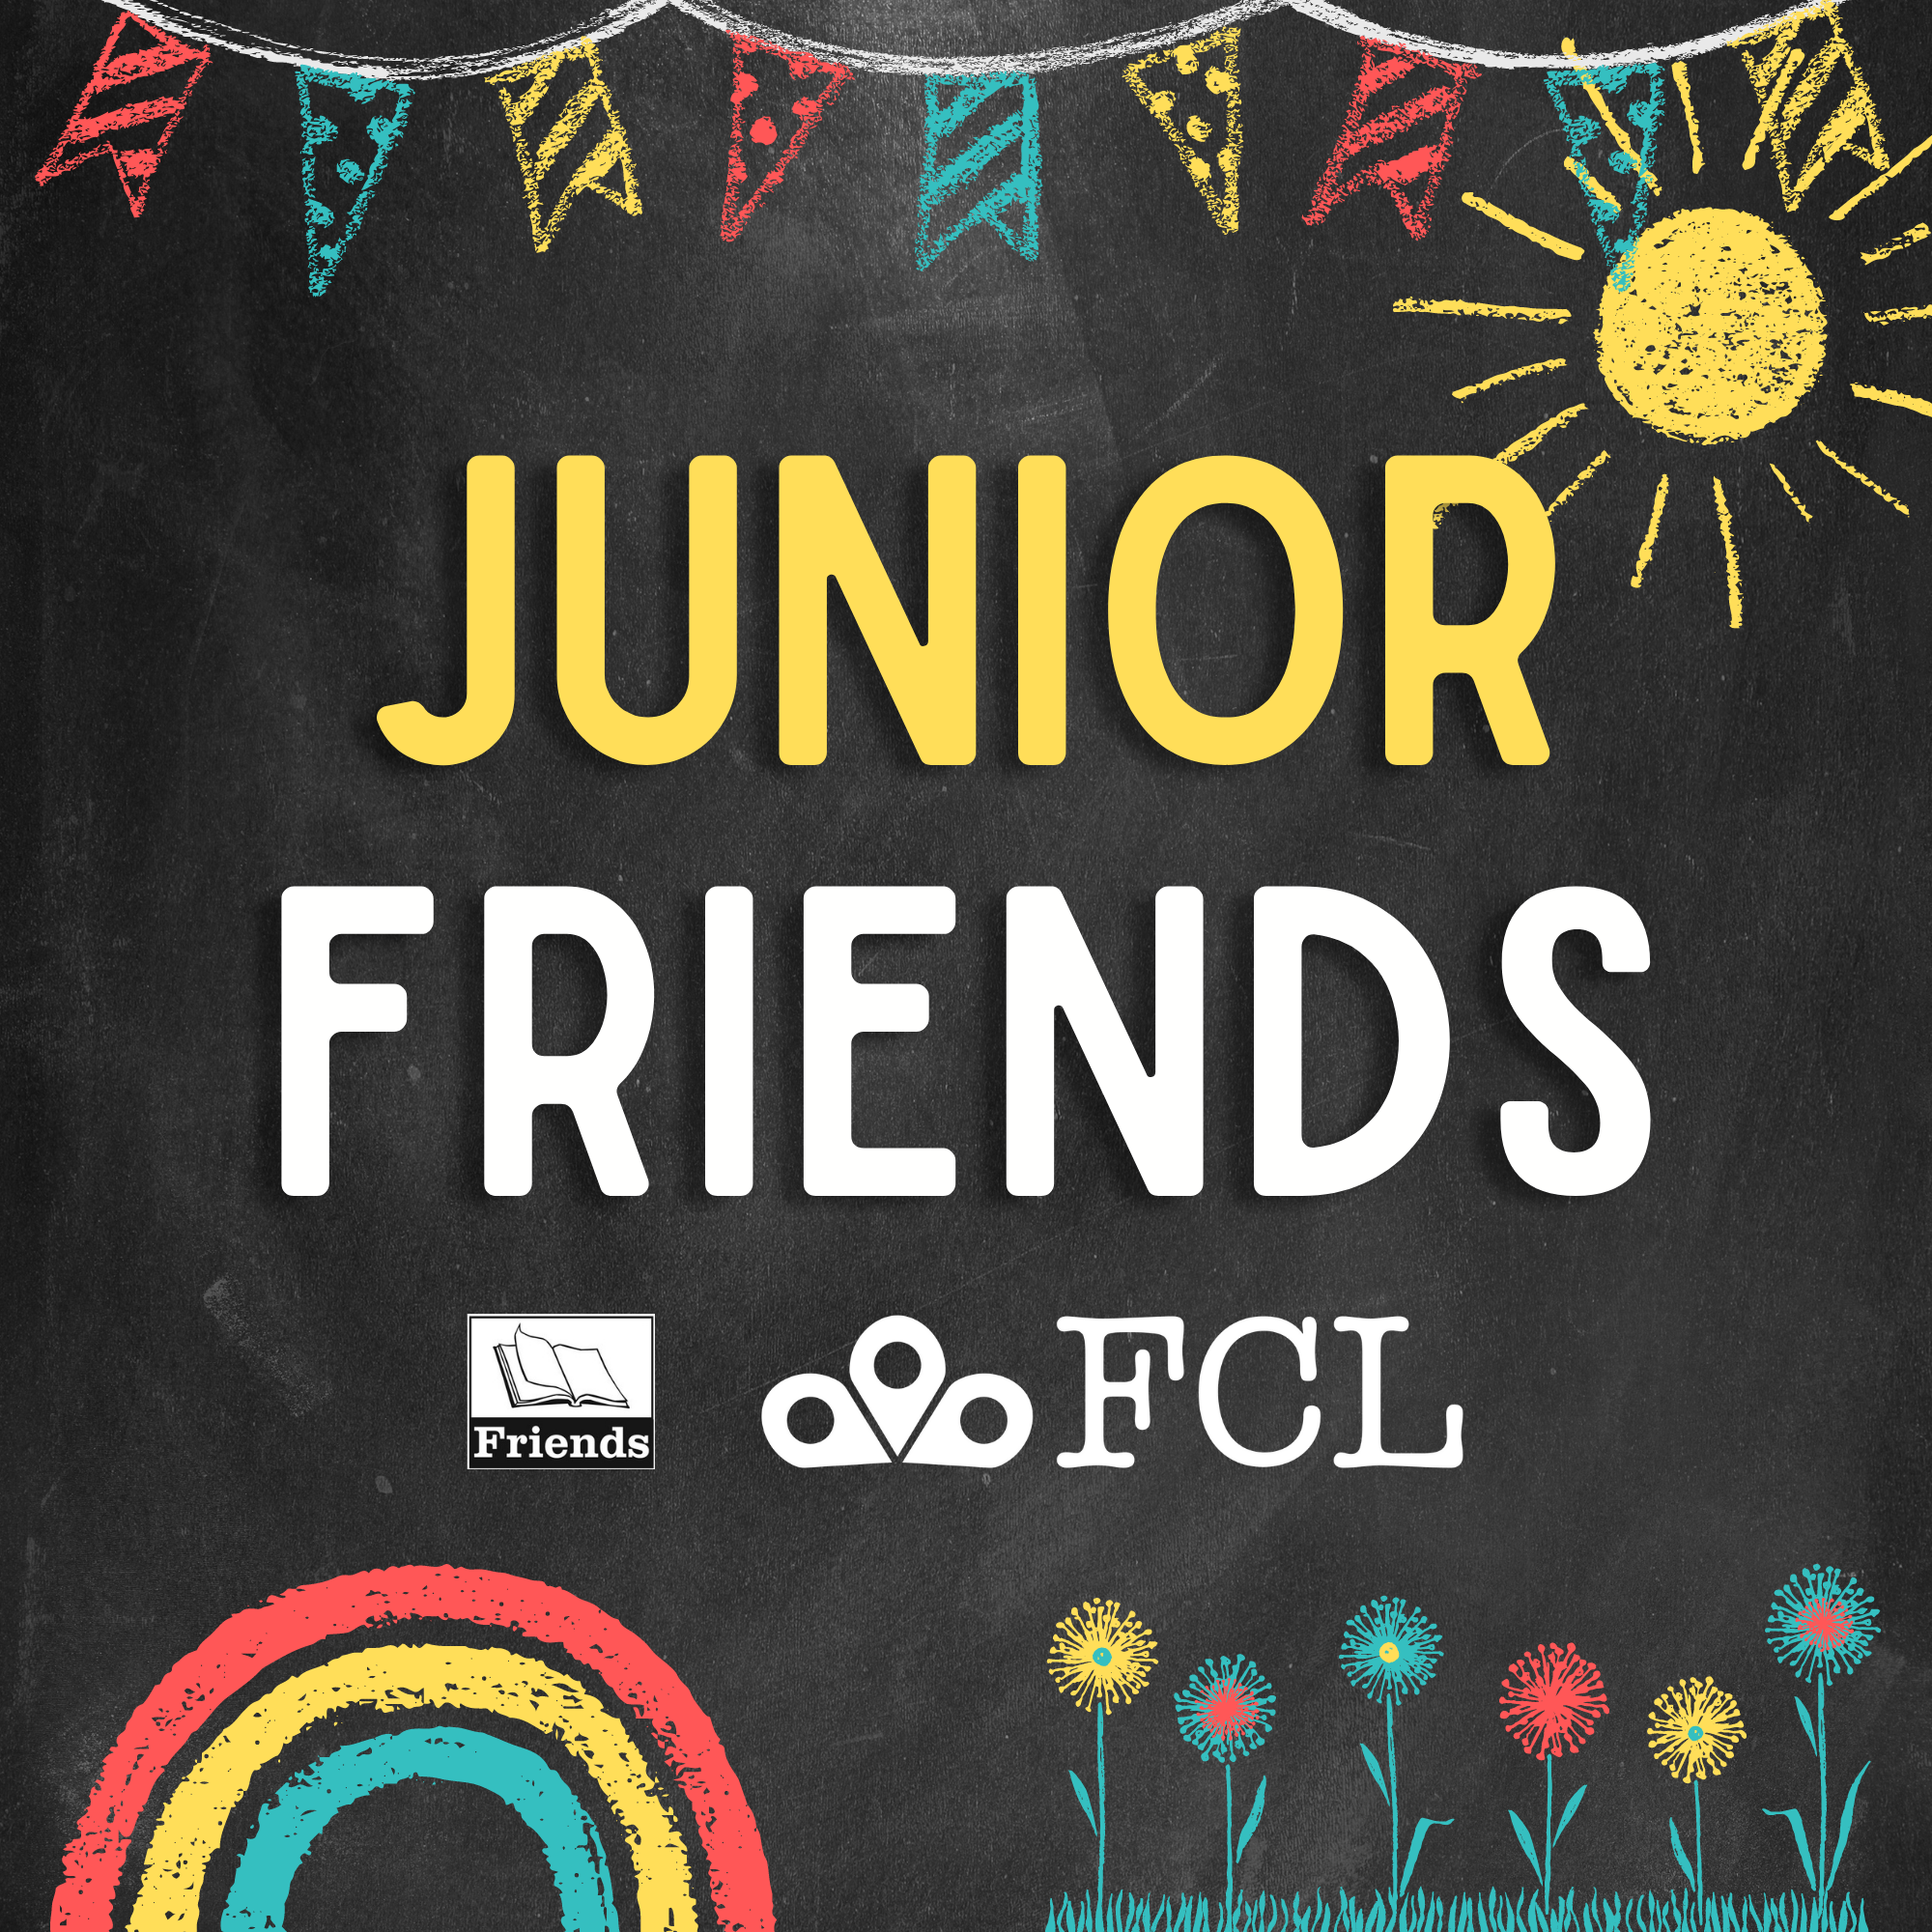 "Junior Friends" is written in plain text; the background displays sidewalk chalk drawings on a black background